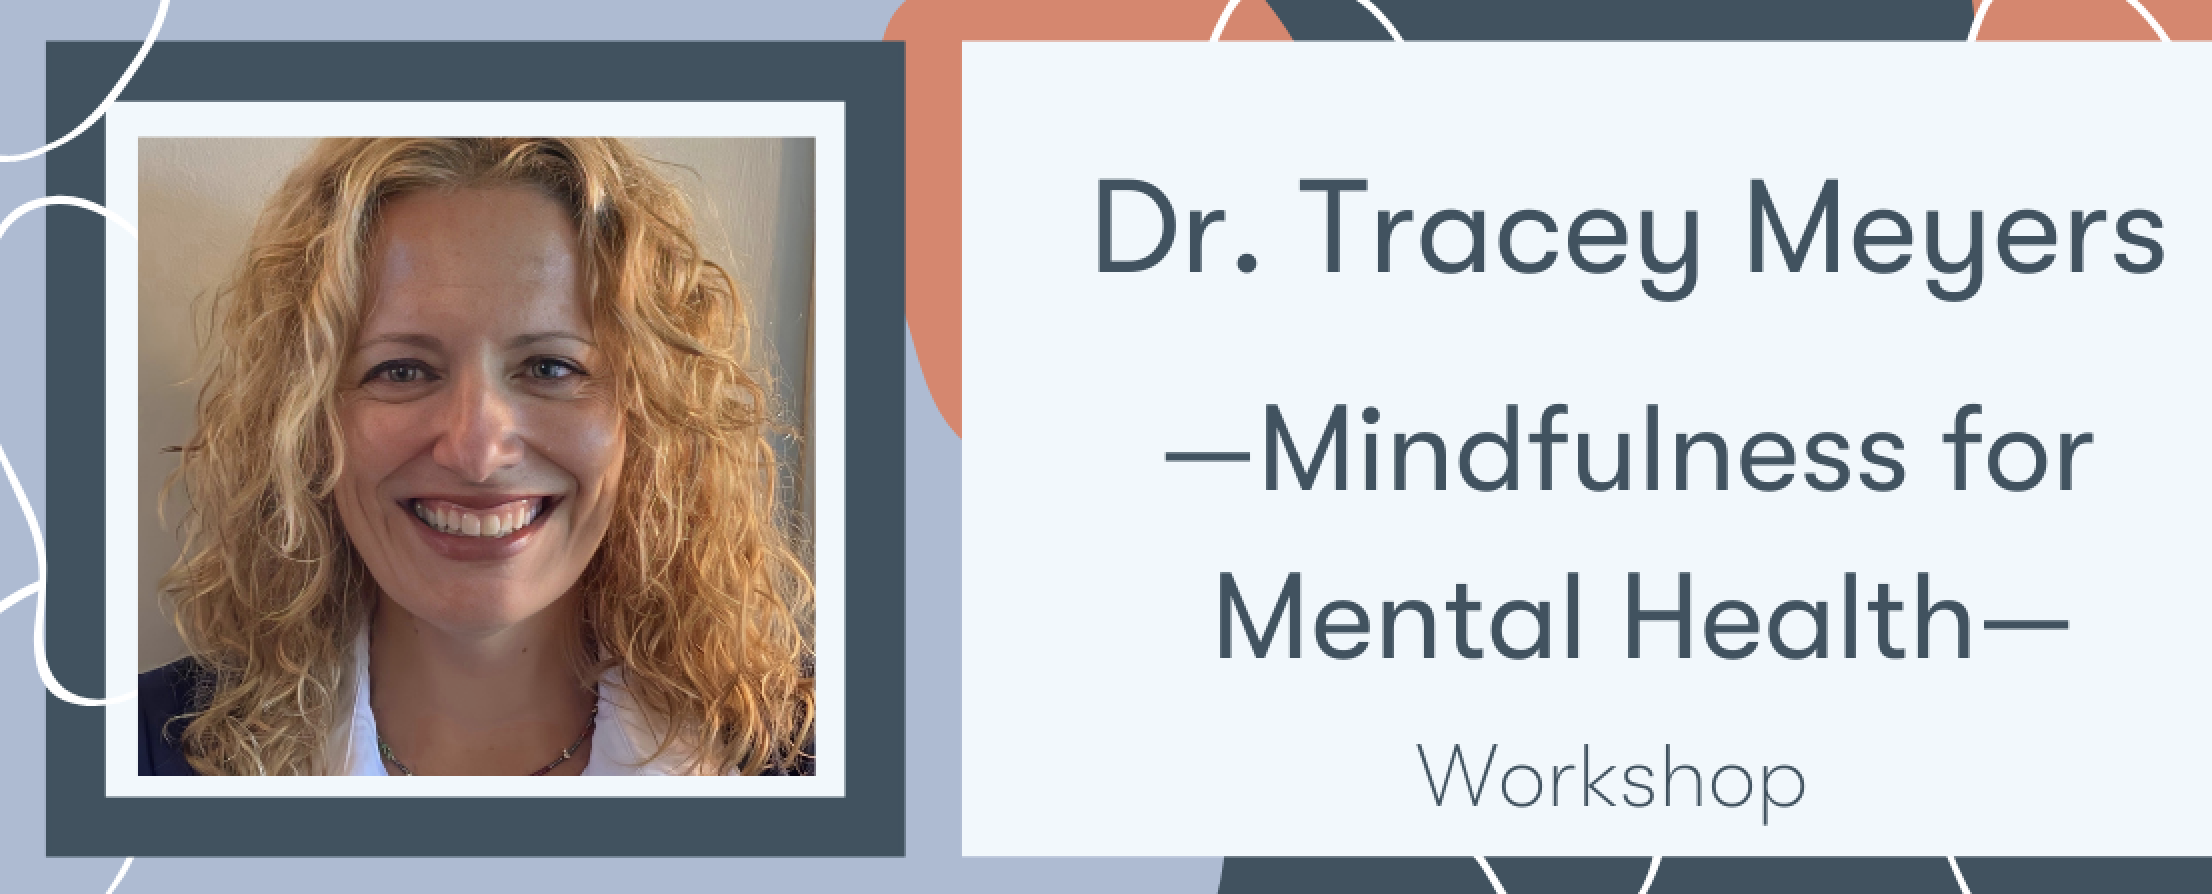 Mindfulness For Mental Health with Dr. Tracey Meyers